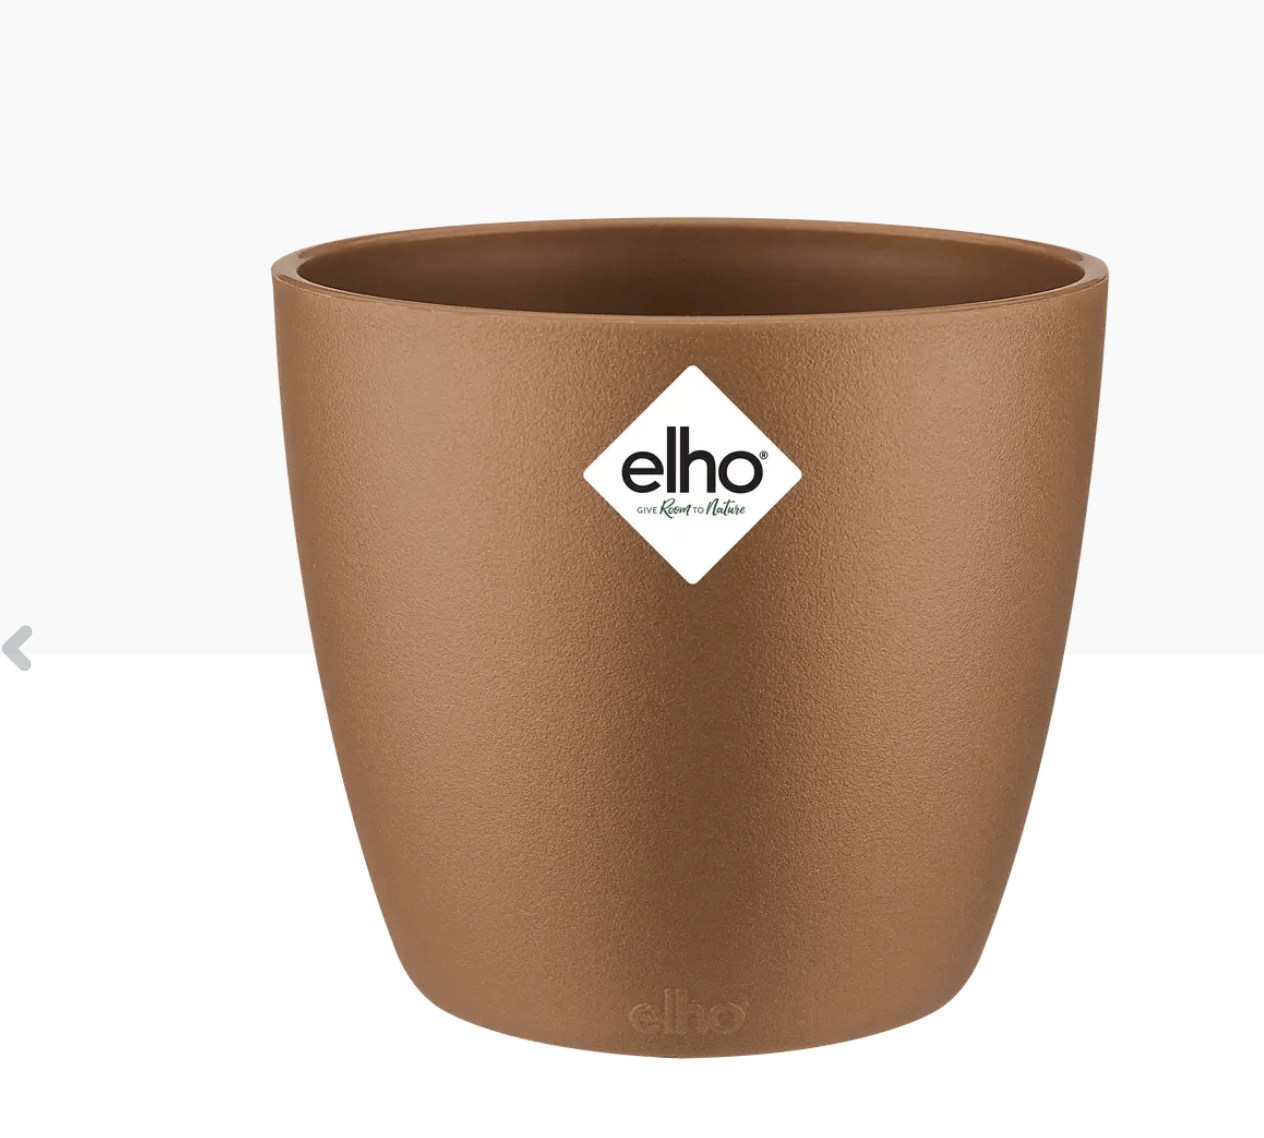 Elho Plant Pot 7cm / Gold Recycled Plastic Plant Pot - 'brussels mini round' in Gold